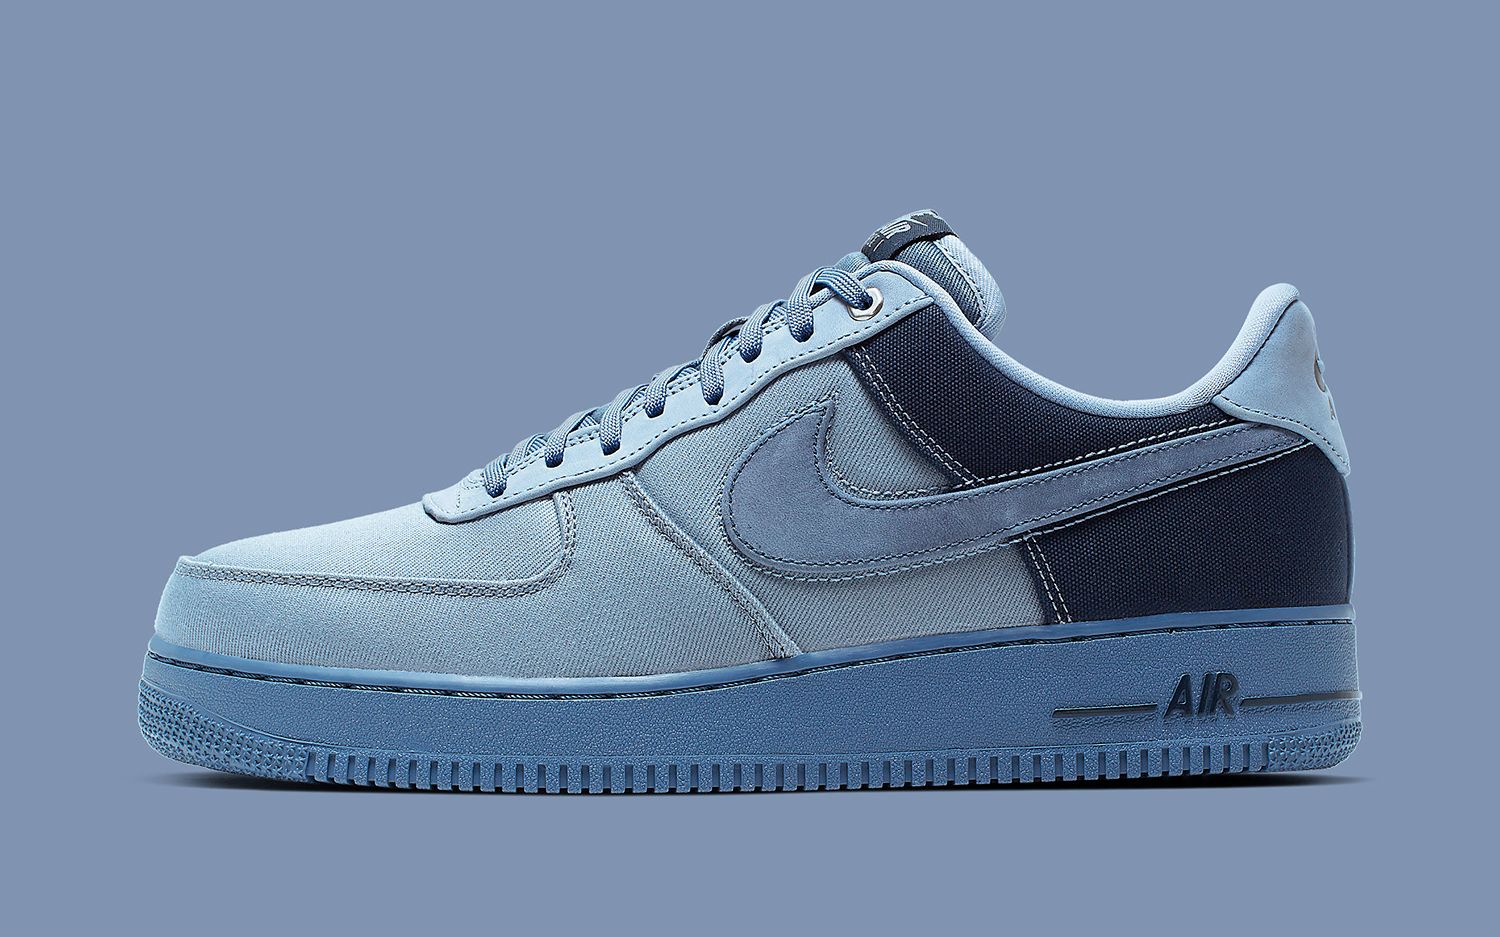 blue and gray air force ones